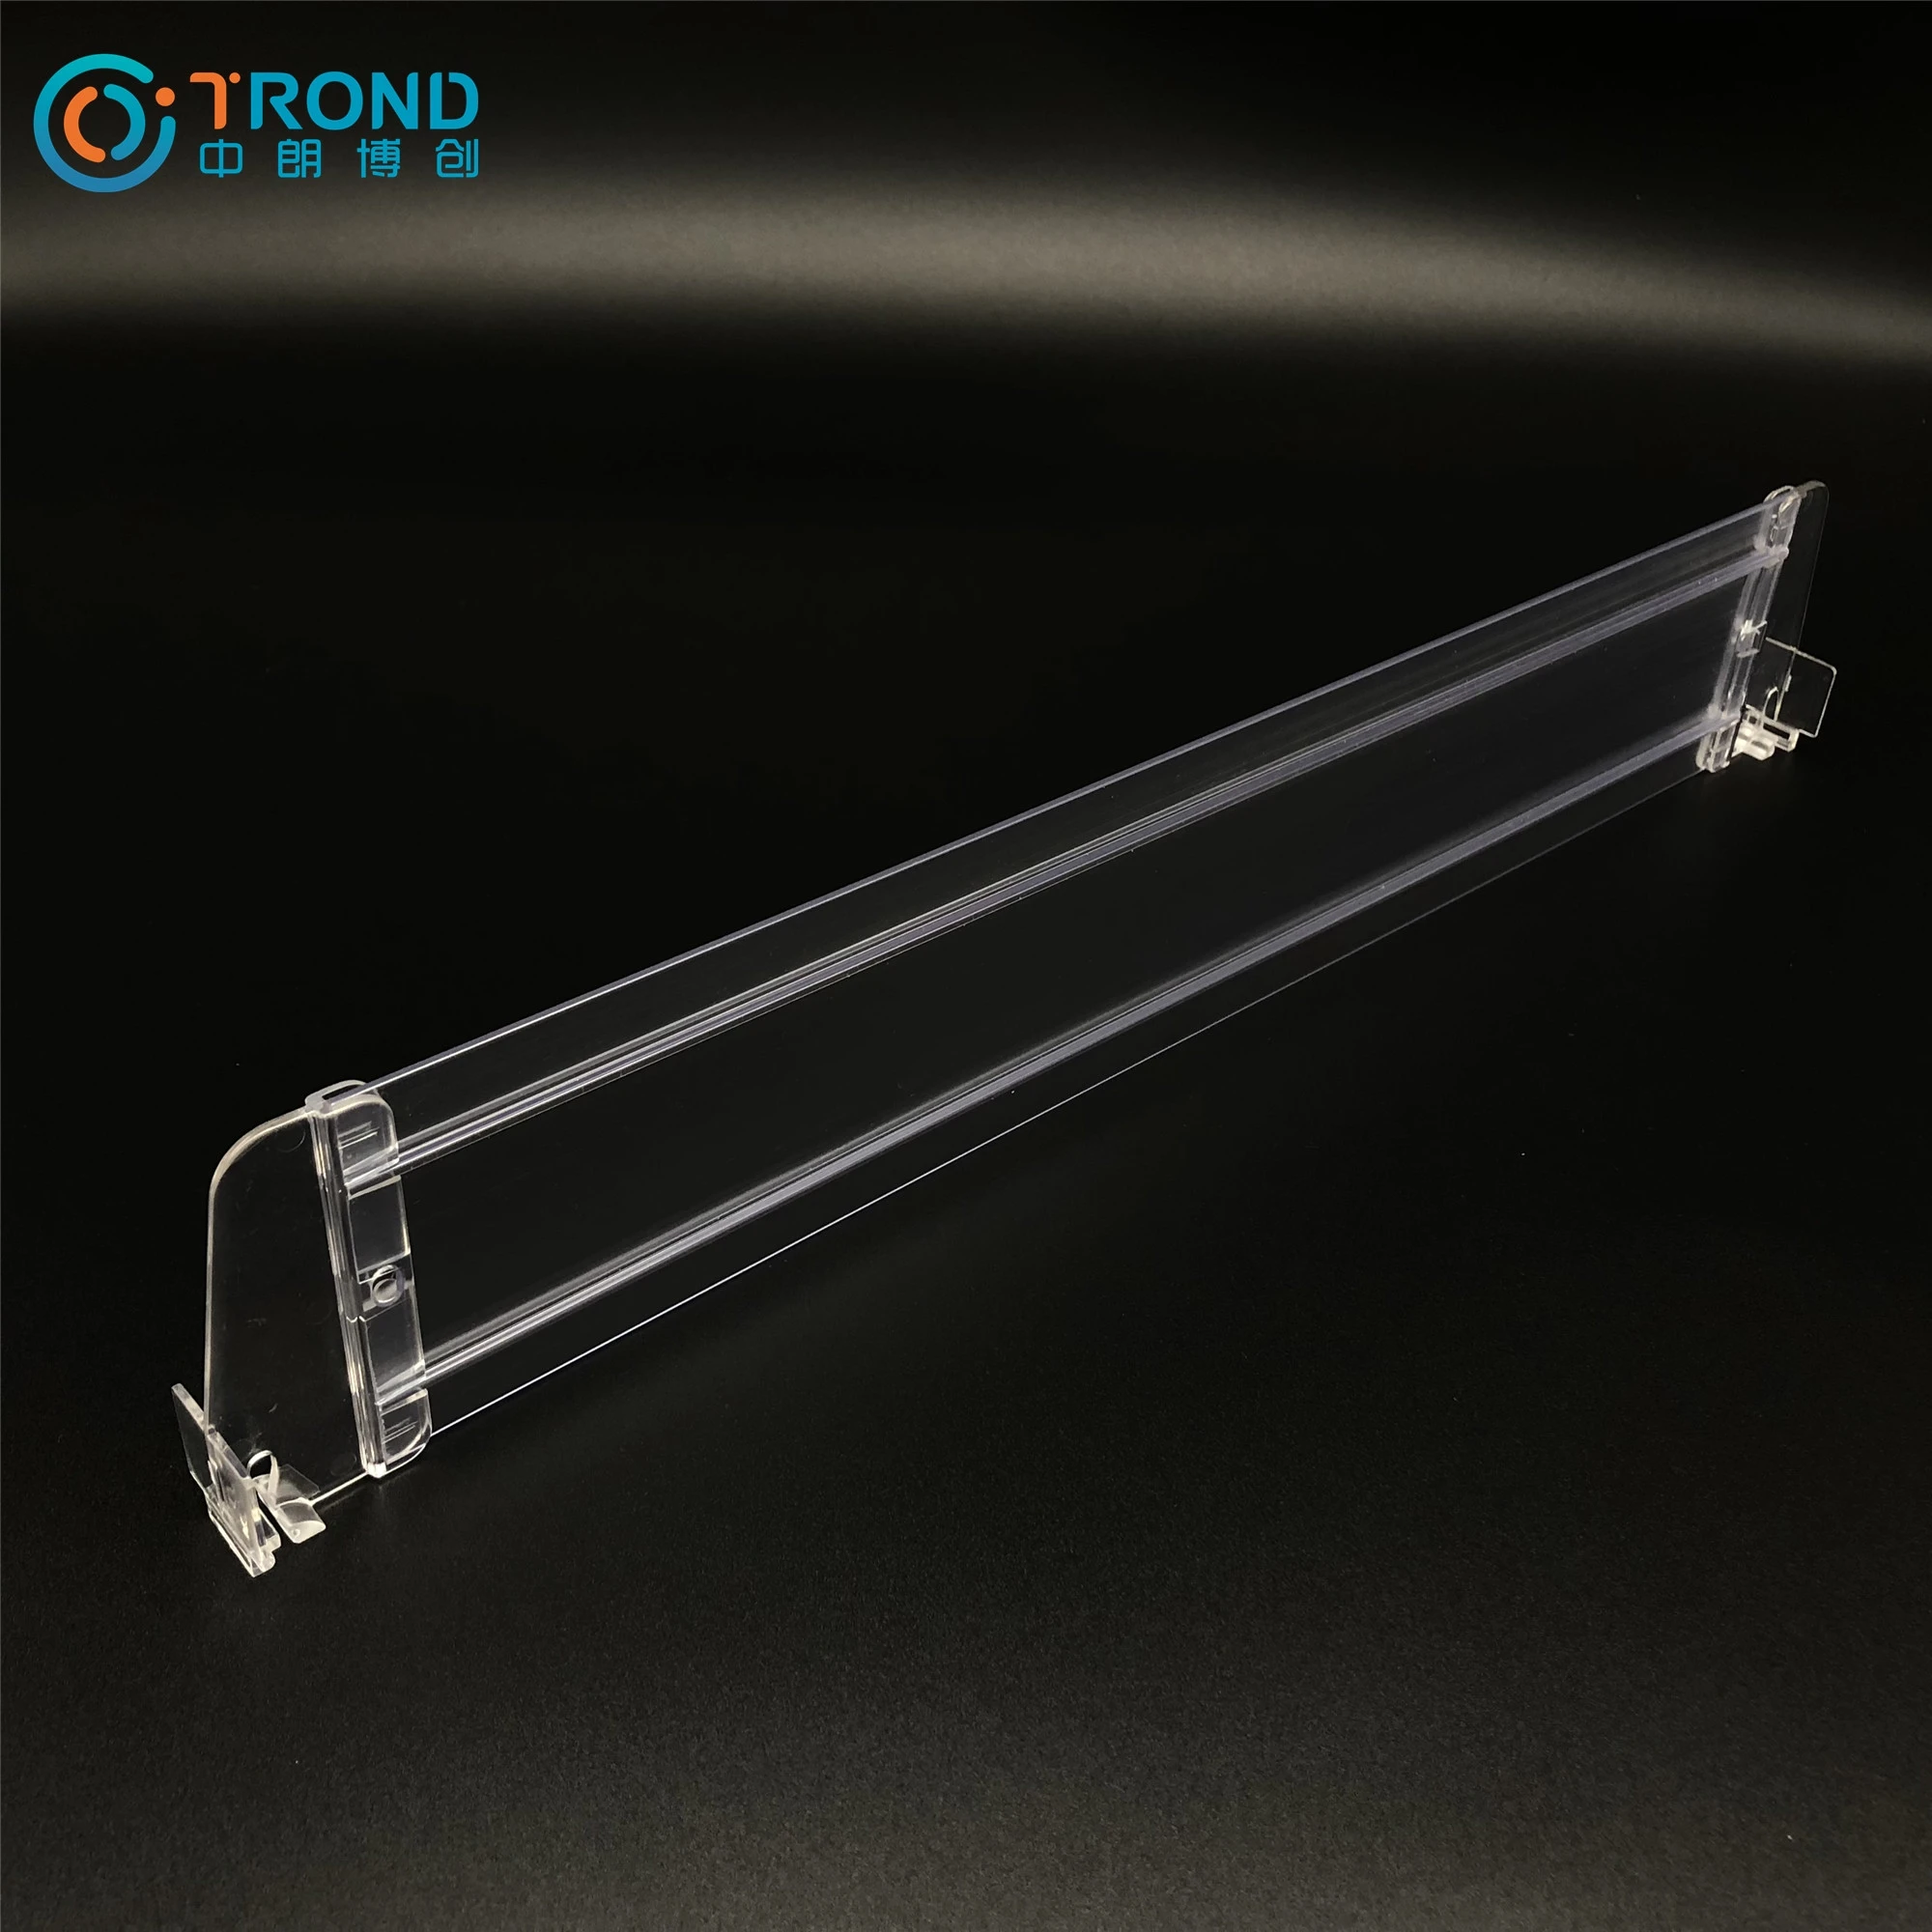 Flexible Plastic Crystal Acrylic Grocery Retail Shelf Combined Divider